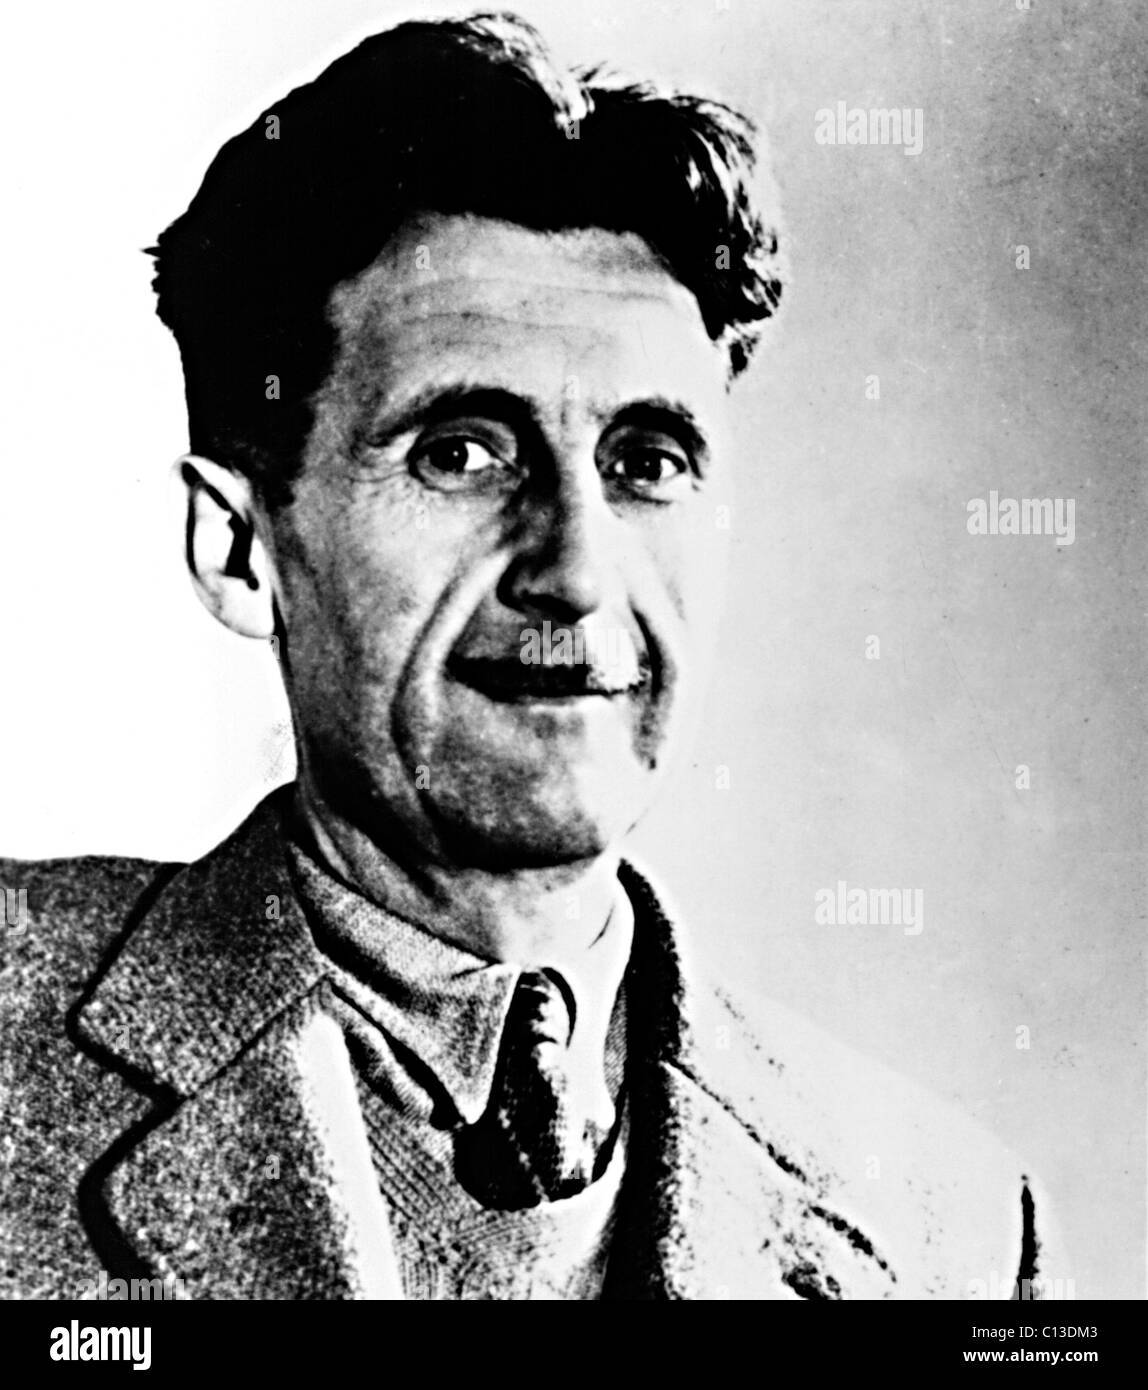 GEORGE ORWELL, circa 1949 (around the time he wrote the book '1984') Stock Photo